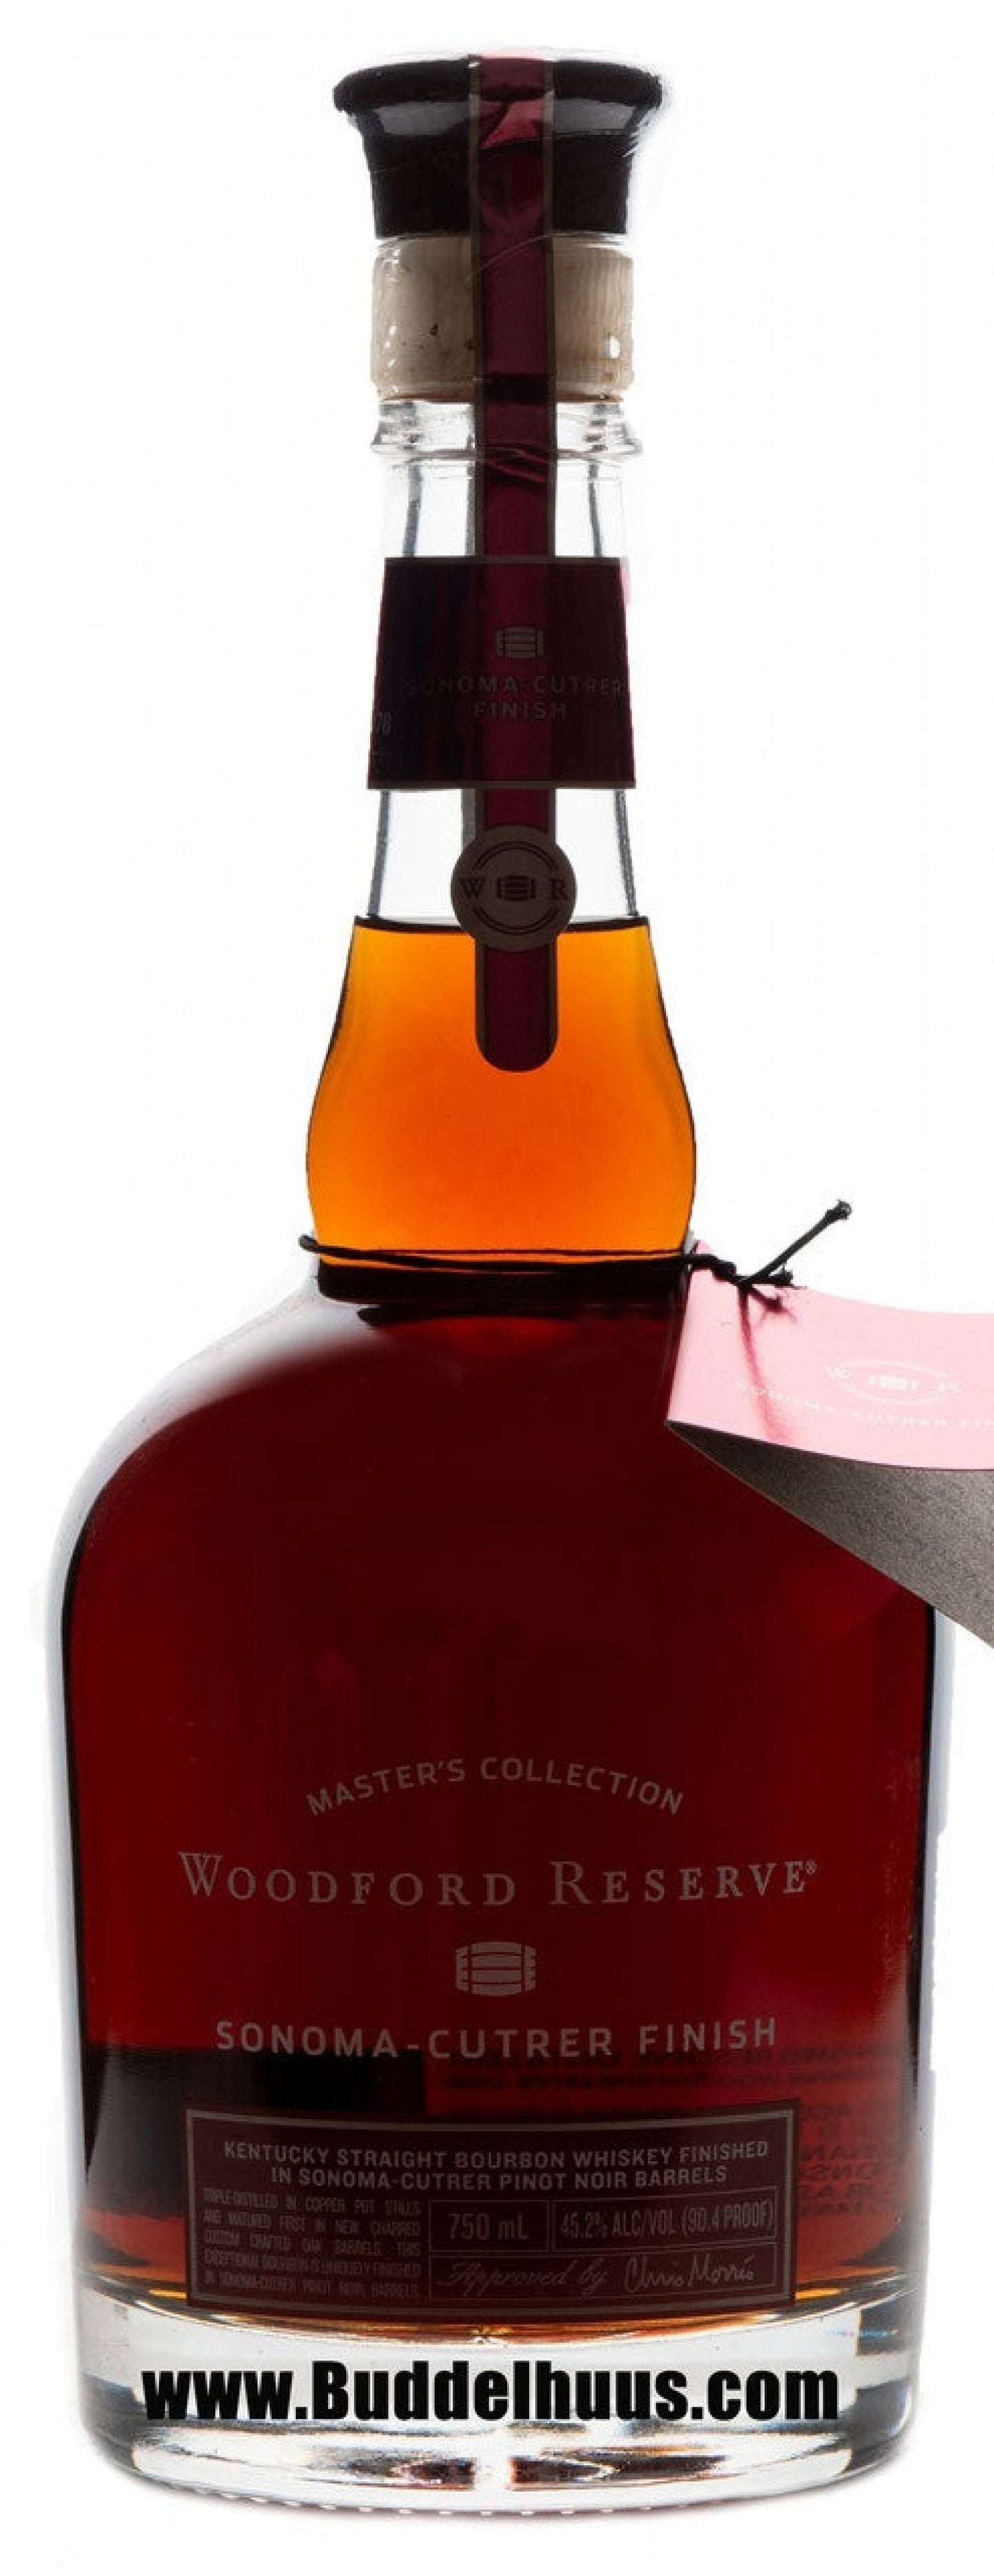 Woodford Reserve Master Collection Sonoma Cutrer Finish 2014